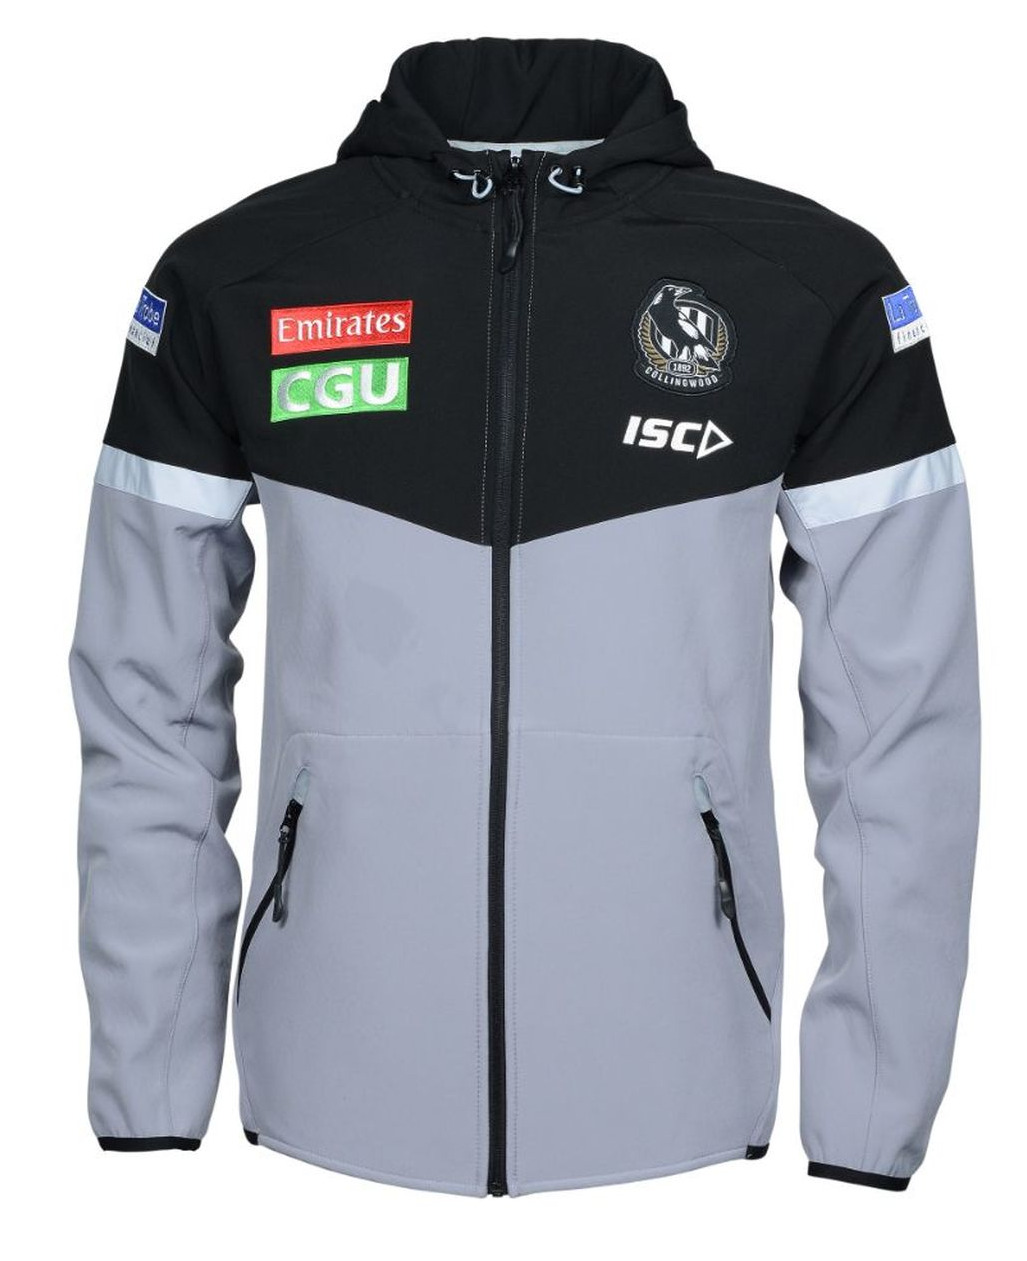 Collingwood Magpies AFL 2020 ISC Players Tech Pro Hoody Jacket Sizes S-5XL!